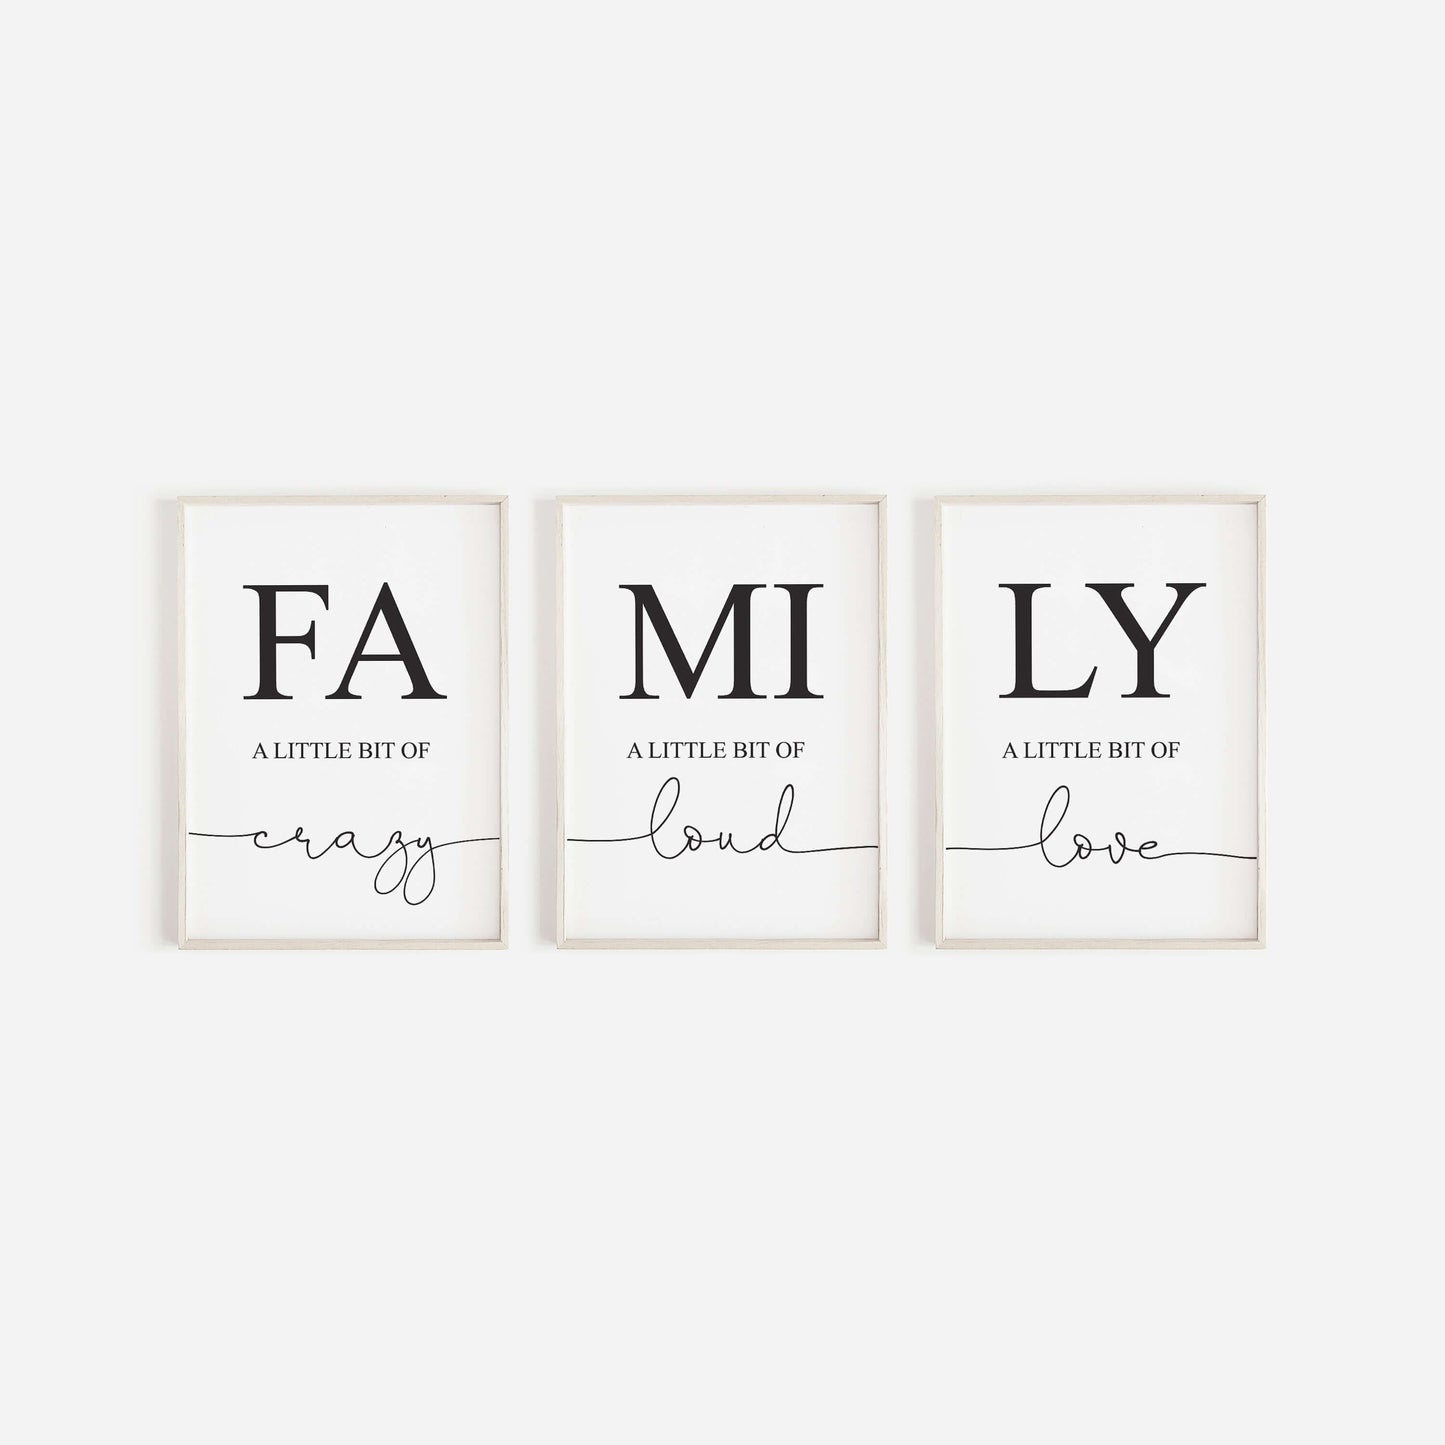 Set Of 3 Family Prints, Family Wall Art, Family Quotes, Definition Prints, Living Room Prints, Bedroom Prints